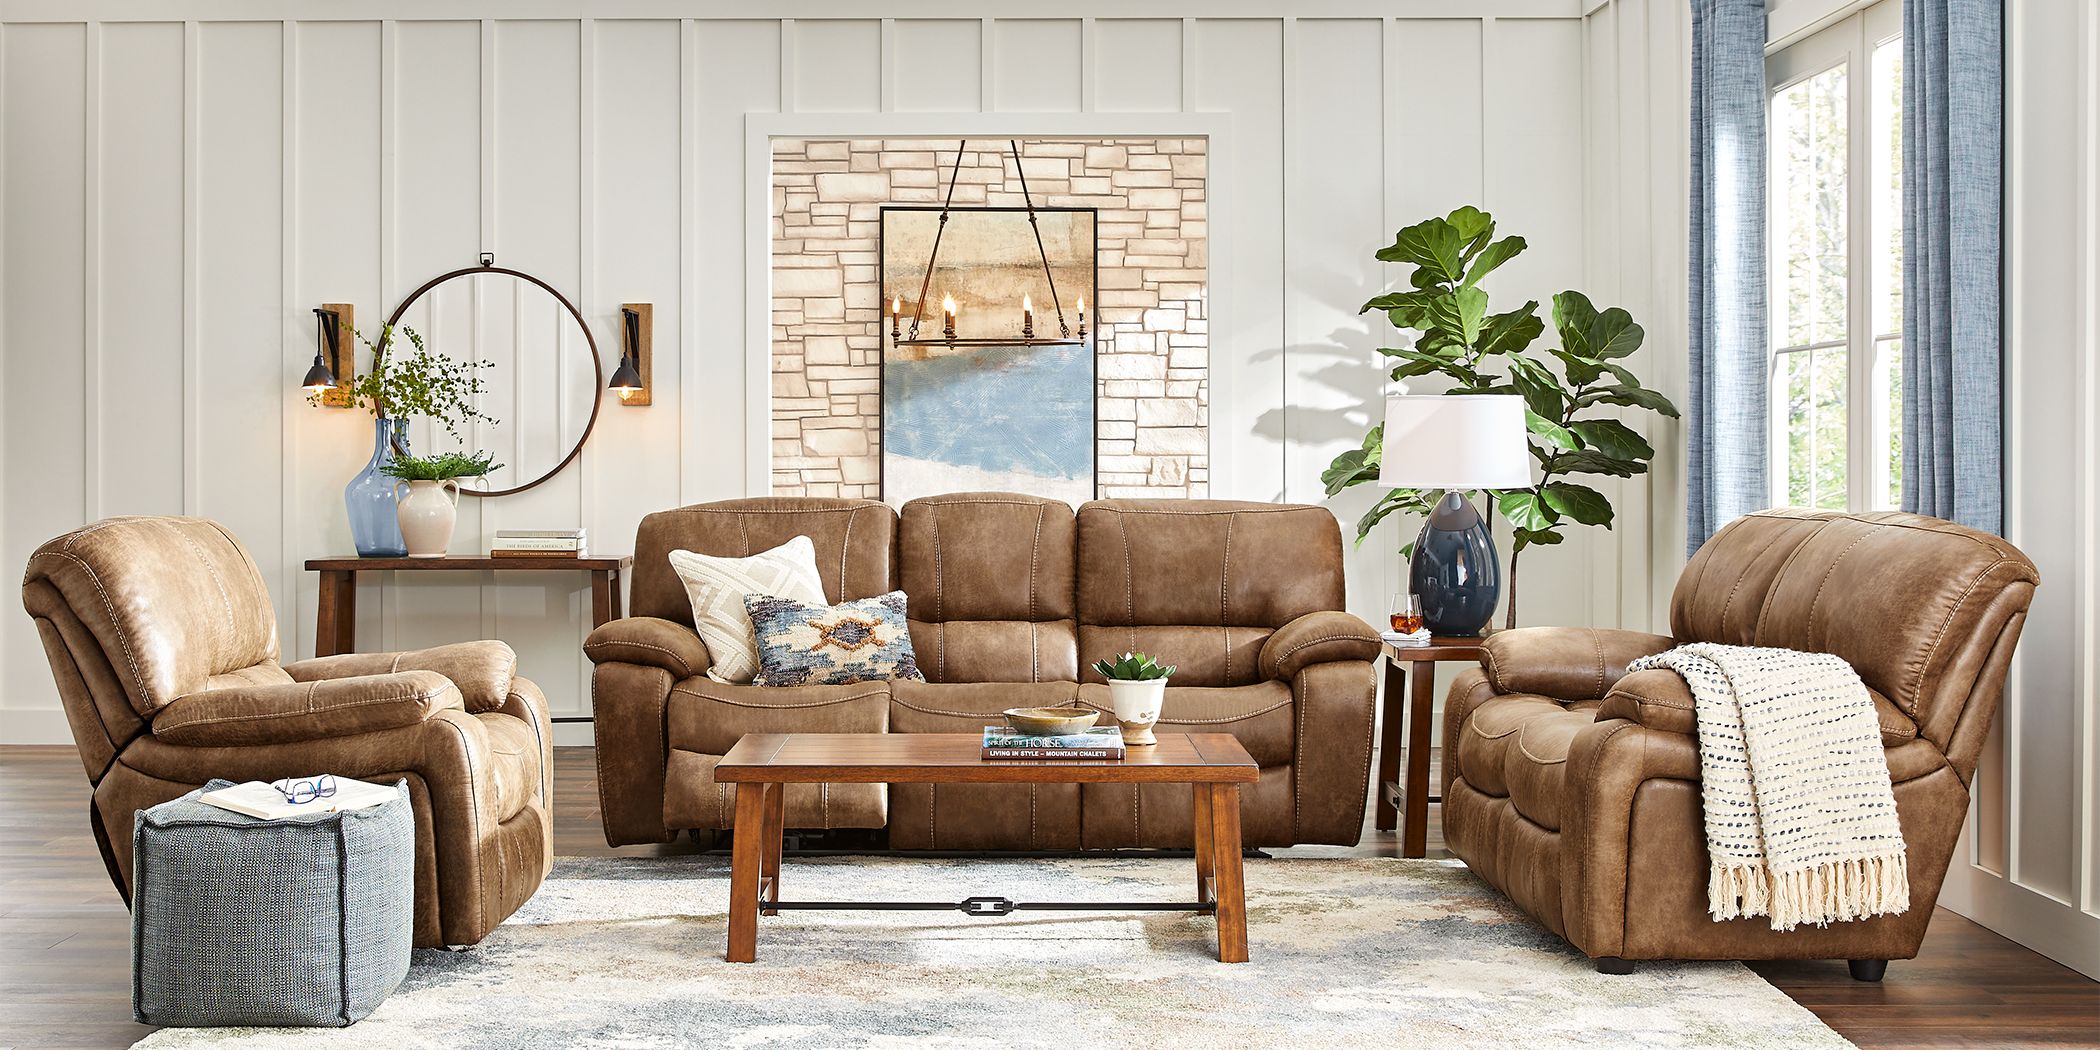 5 Piece Living Room Furniture Sets Cheap : Find great, low priced ...